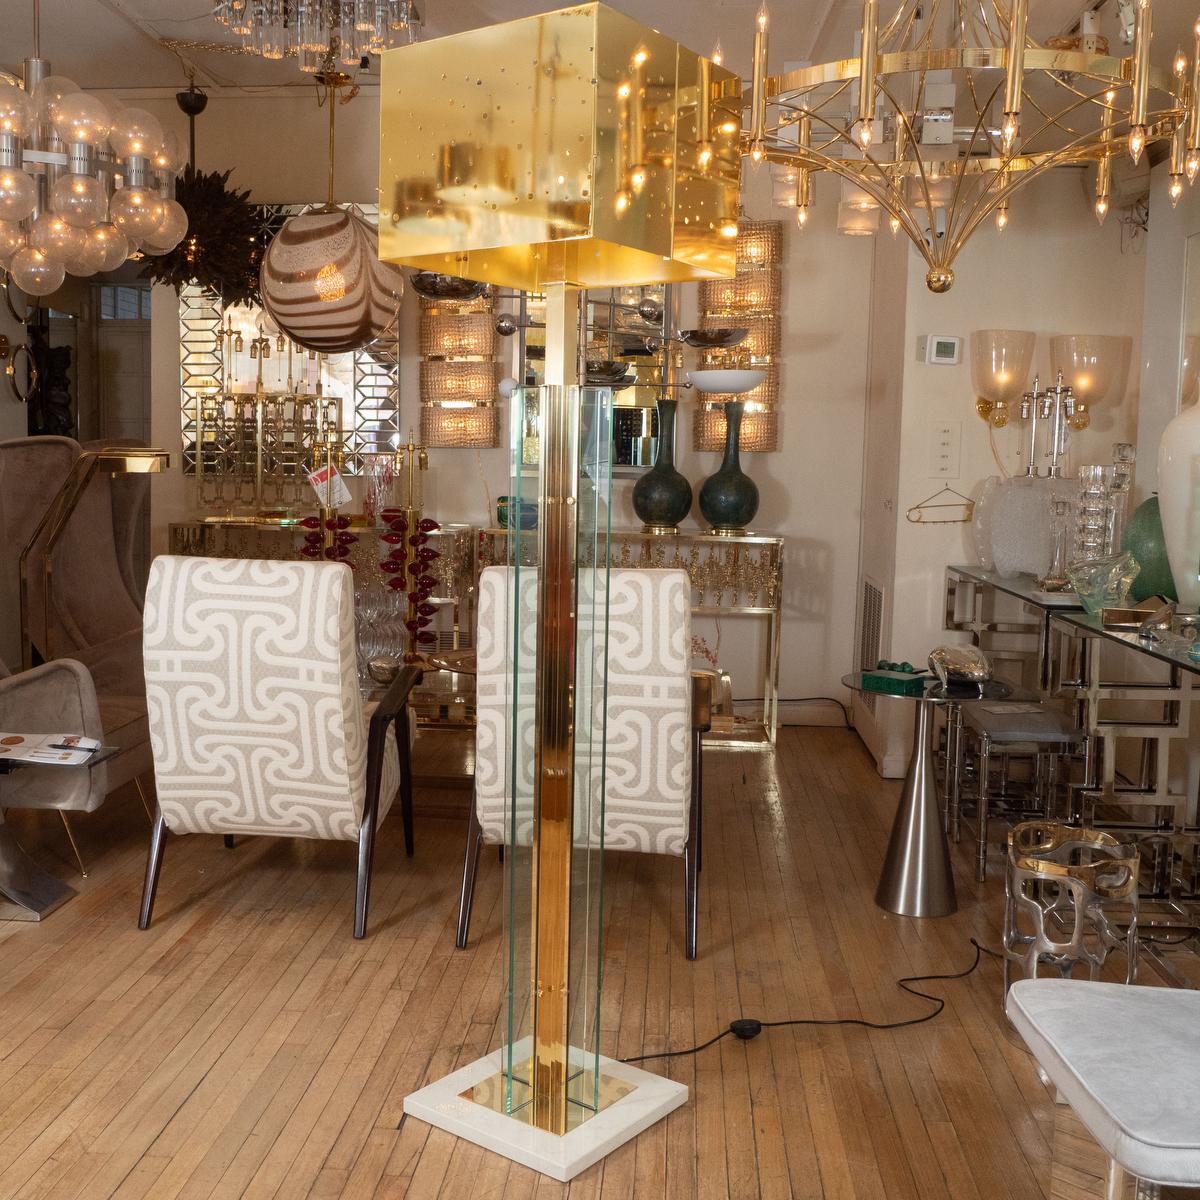 Pair of brass and glass floor lamps with brass decorative shades.